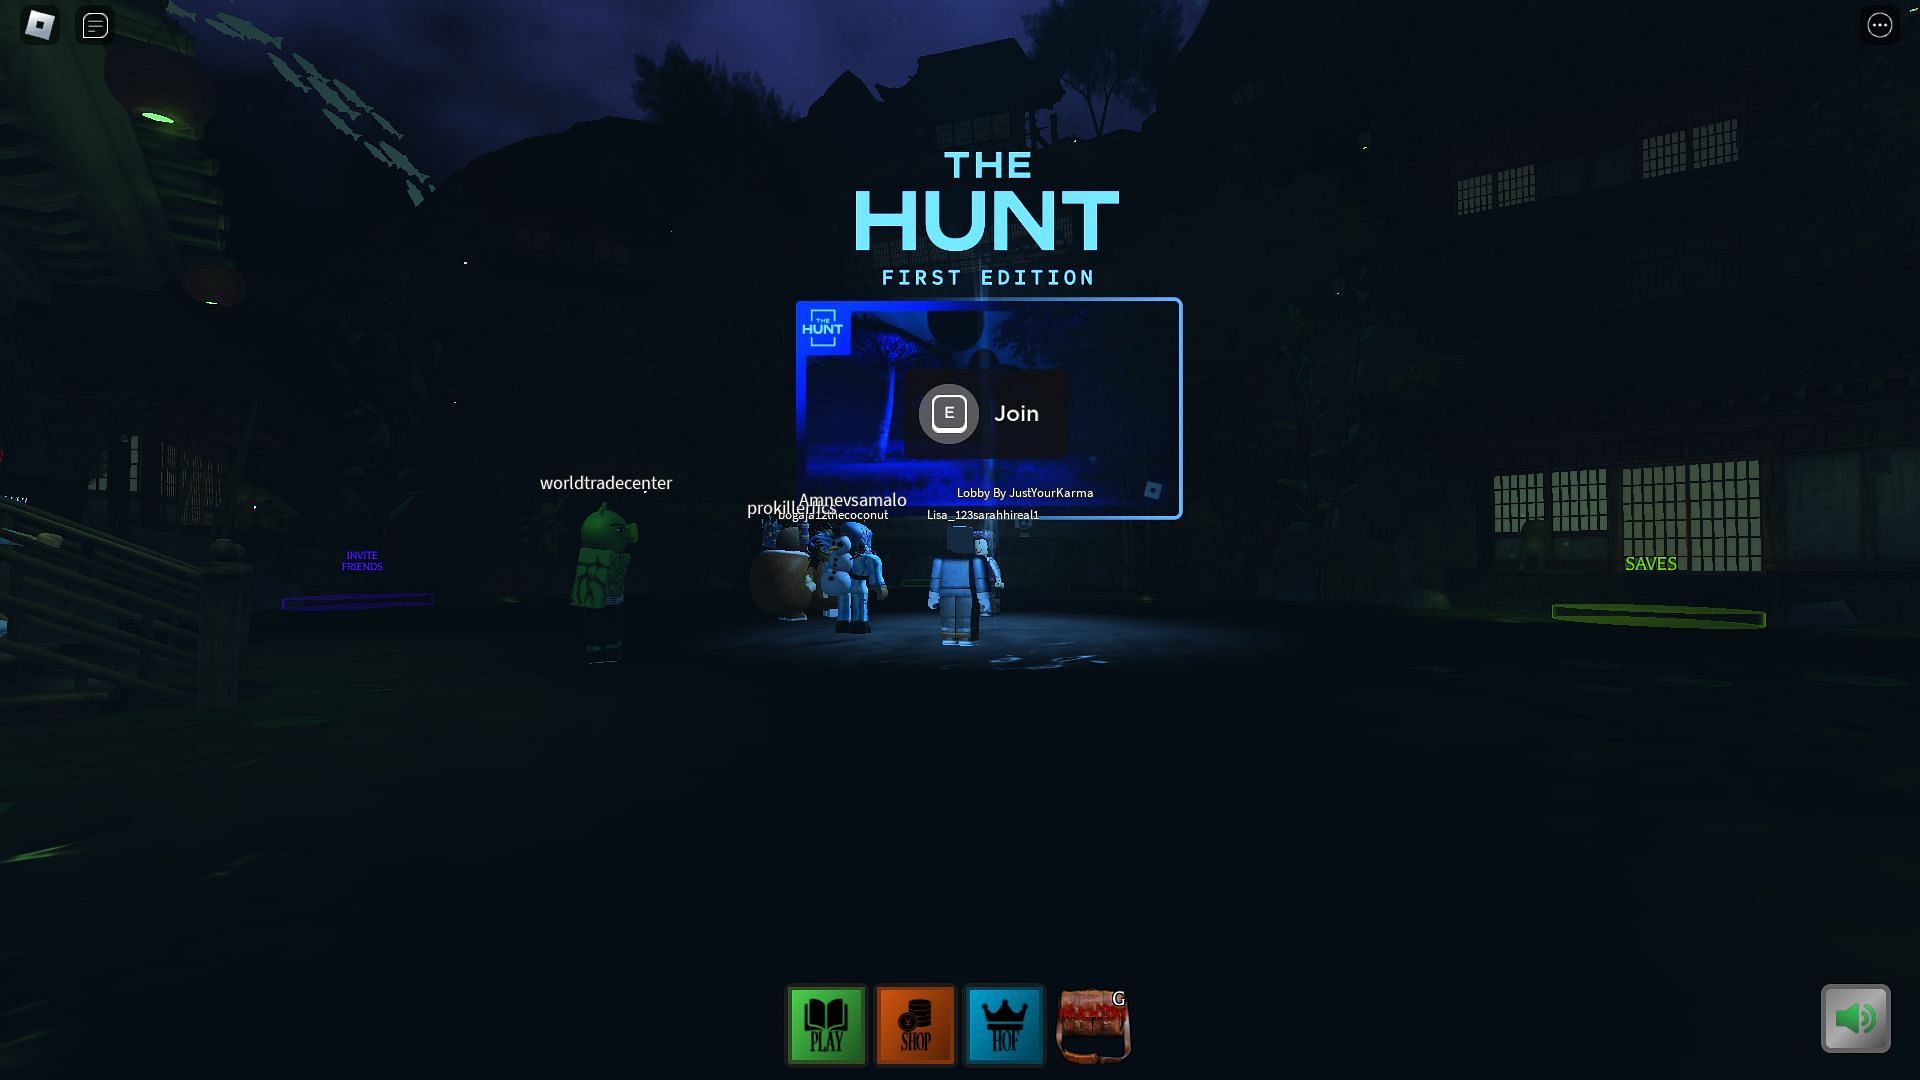 In-game display for The Hunt (Image via Roblox)